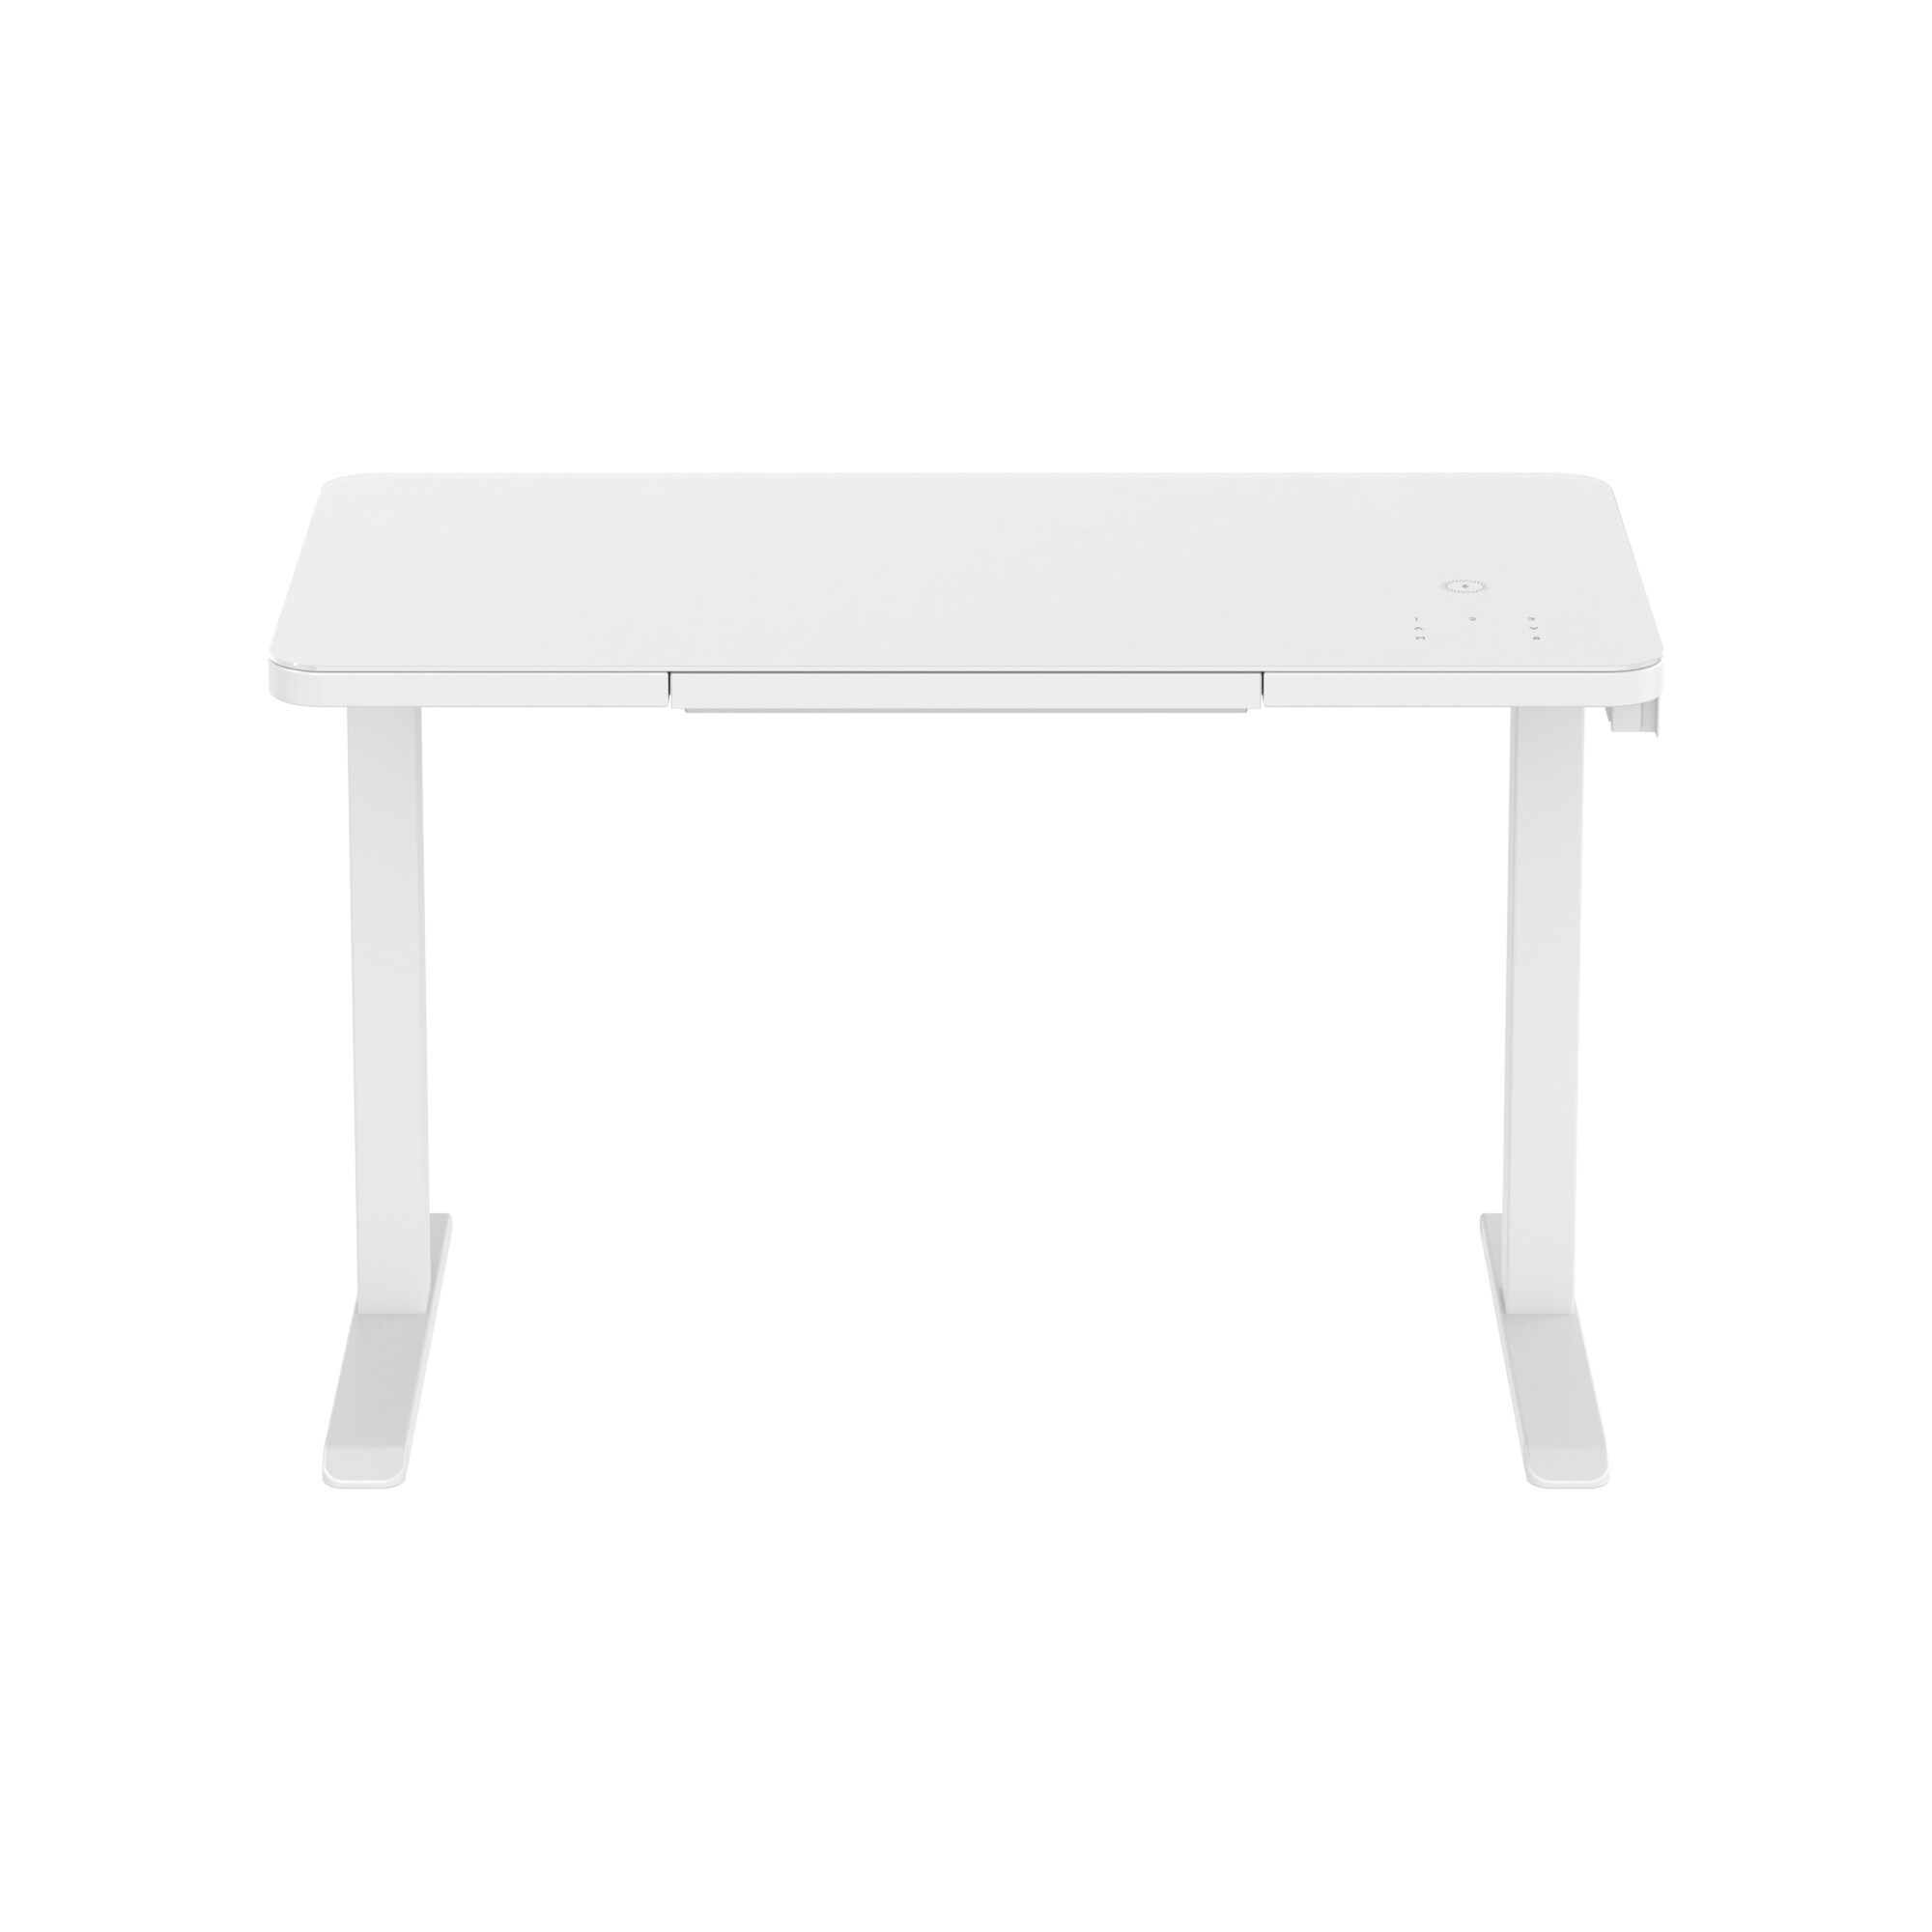 https://ak1.ostkcdn.com/images/products/is/images/direct/a94810cbb313e02d60ffdc57ea56a8c3fdd936c7/Small-Computer-Desk-Study-Table-for-Small-Spaces-Home-Office-Student-Laptop-PC-Writing-Desks-Office-Desk-with-Keyboard-Tray.jpg